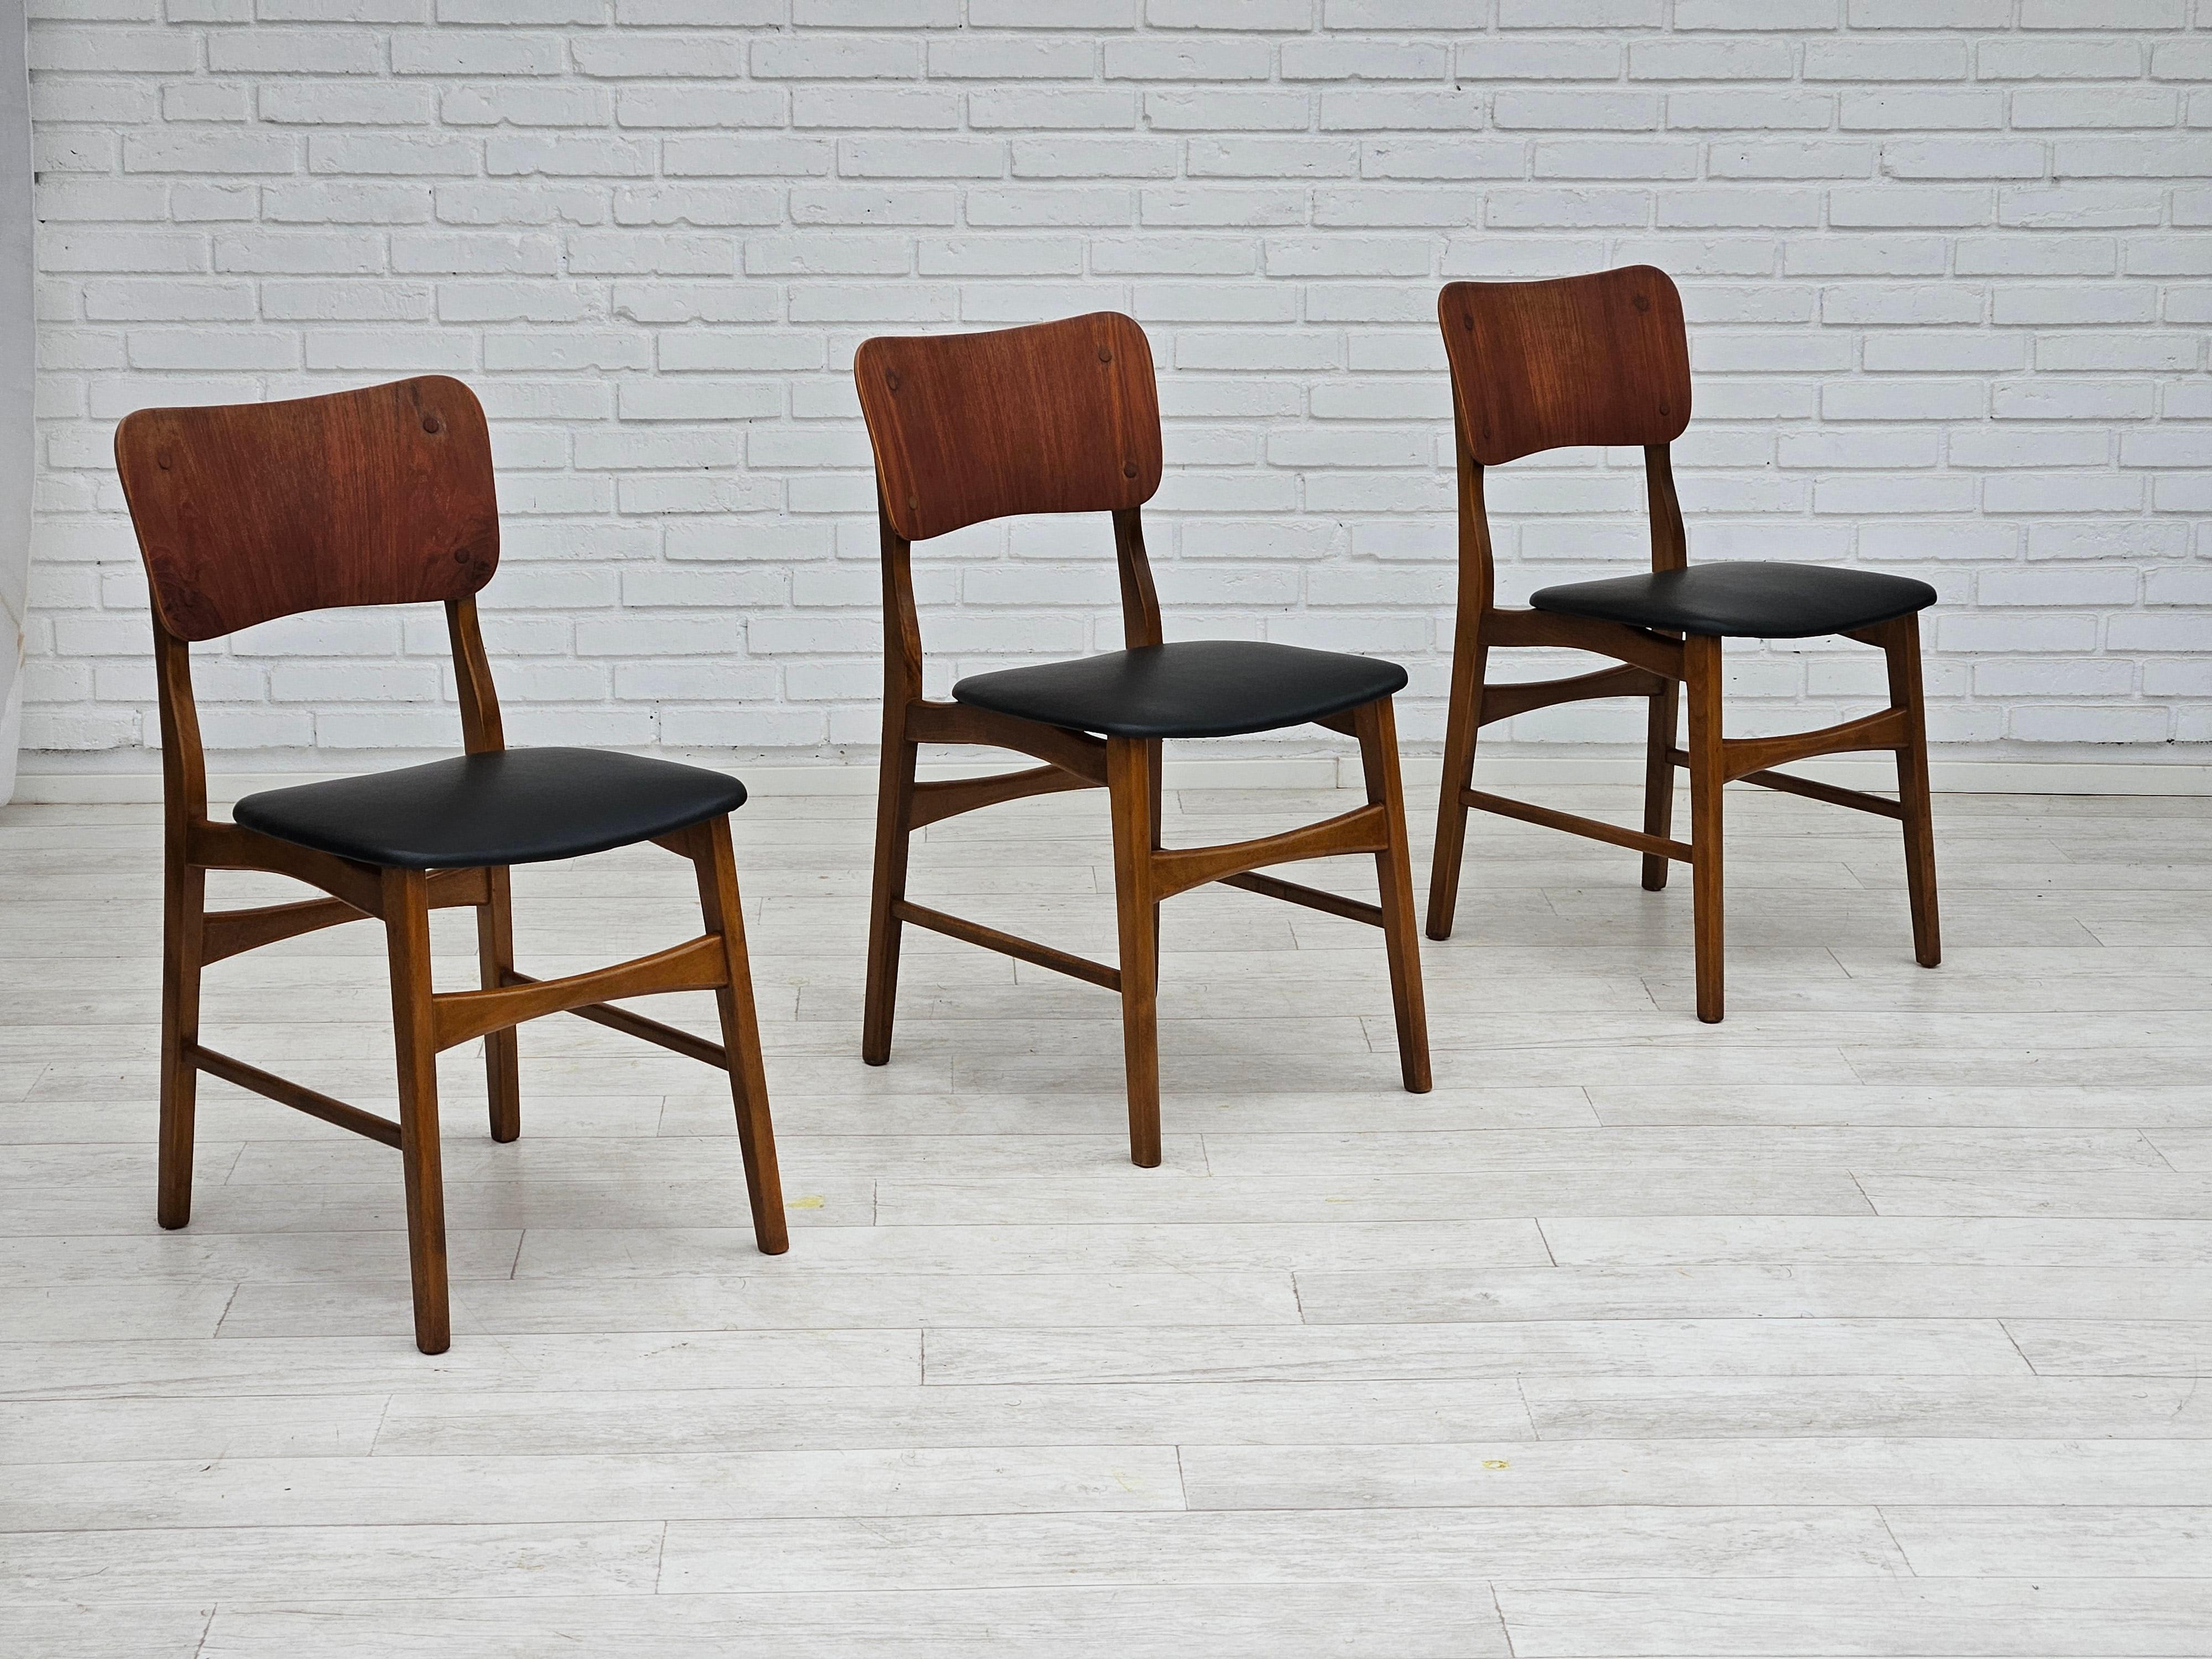 1960s, Danish design by Ib Kofod Larsen, set of 3 dining chairs model 62. Completely renovated-reupholstered in black leather by craftsman. Teak wood and beech wood. Manufactured by a Danish furniture manufacturer Boltinge Stolefabrik.
Please note